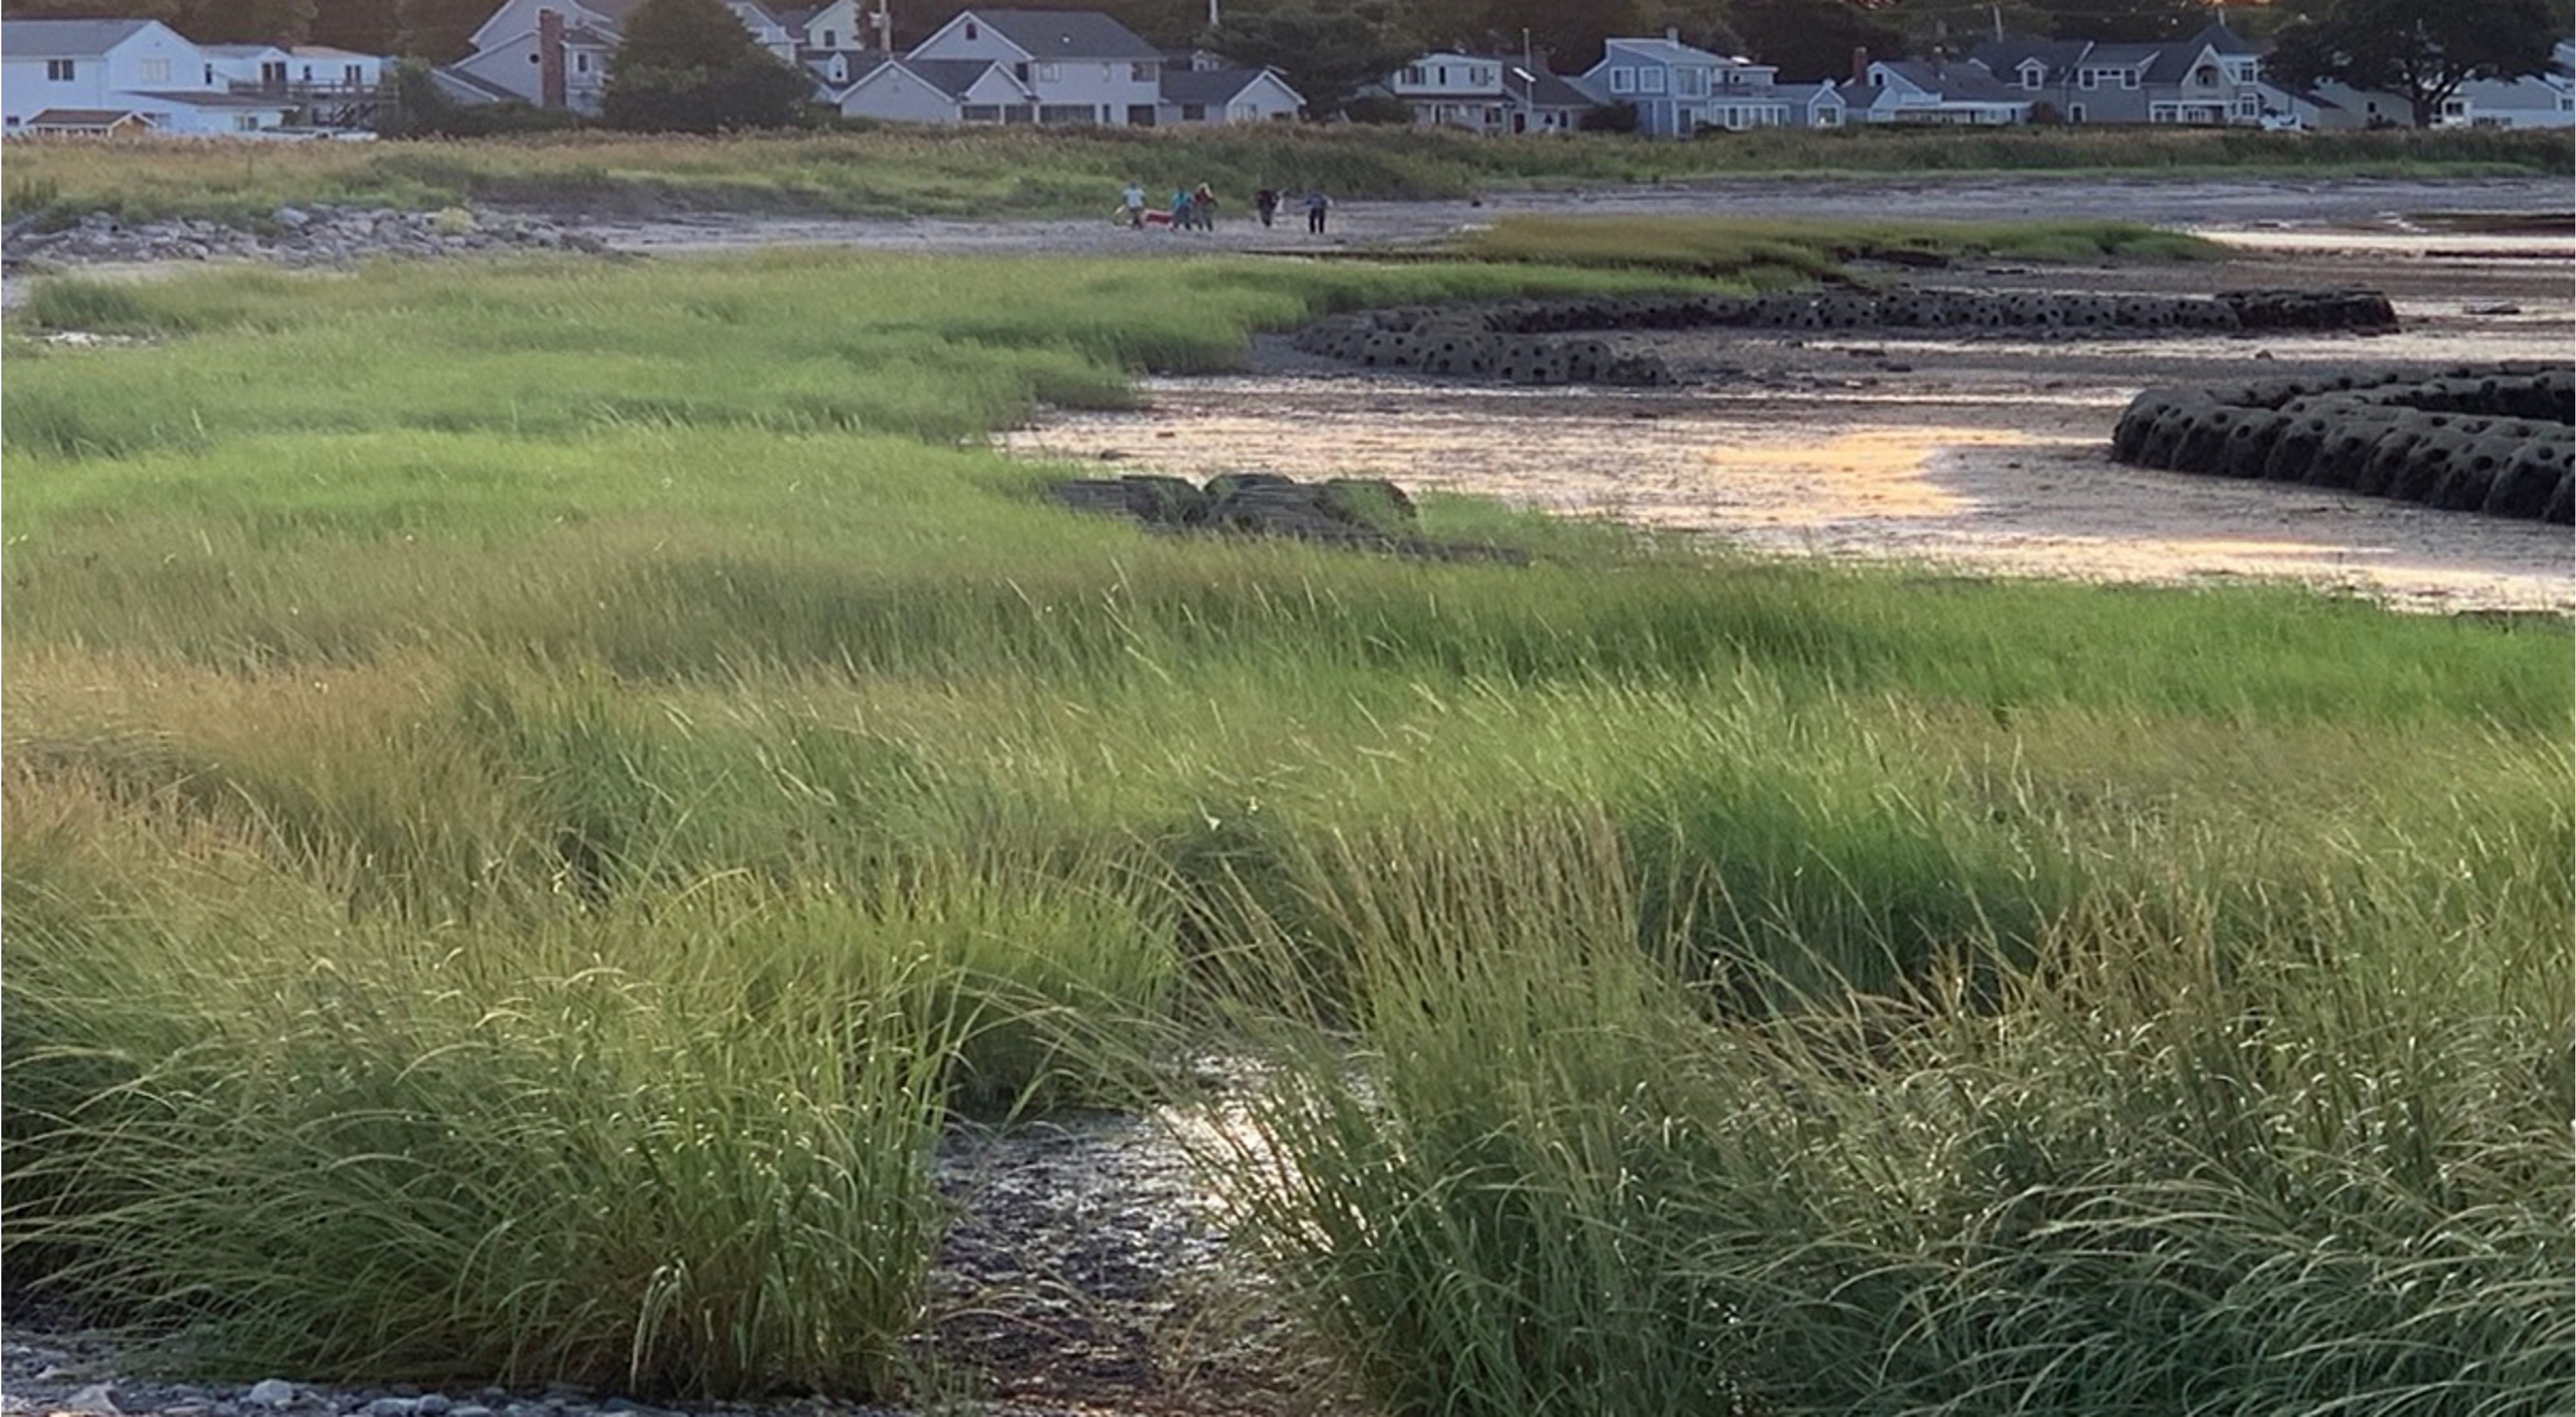 Green marsh grasses in the foreground with water's edge in midground and rows of houses in background.